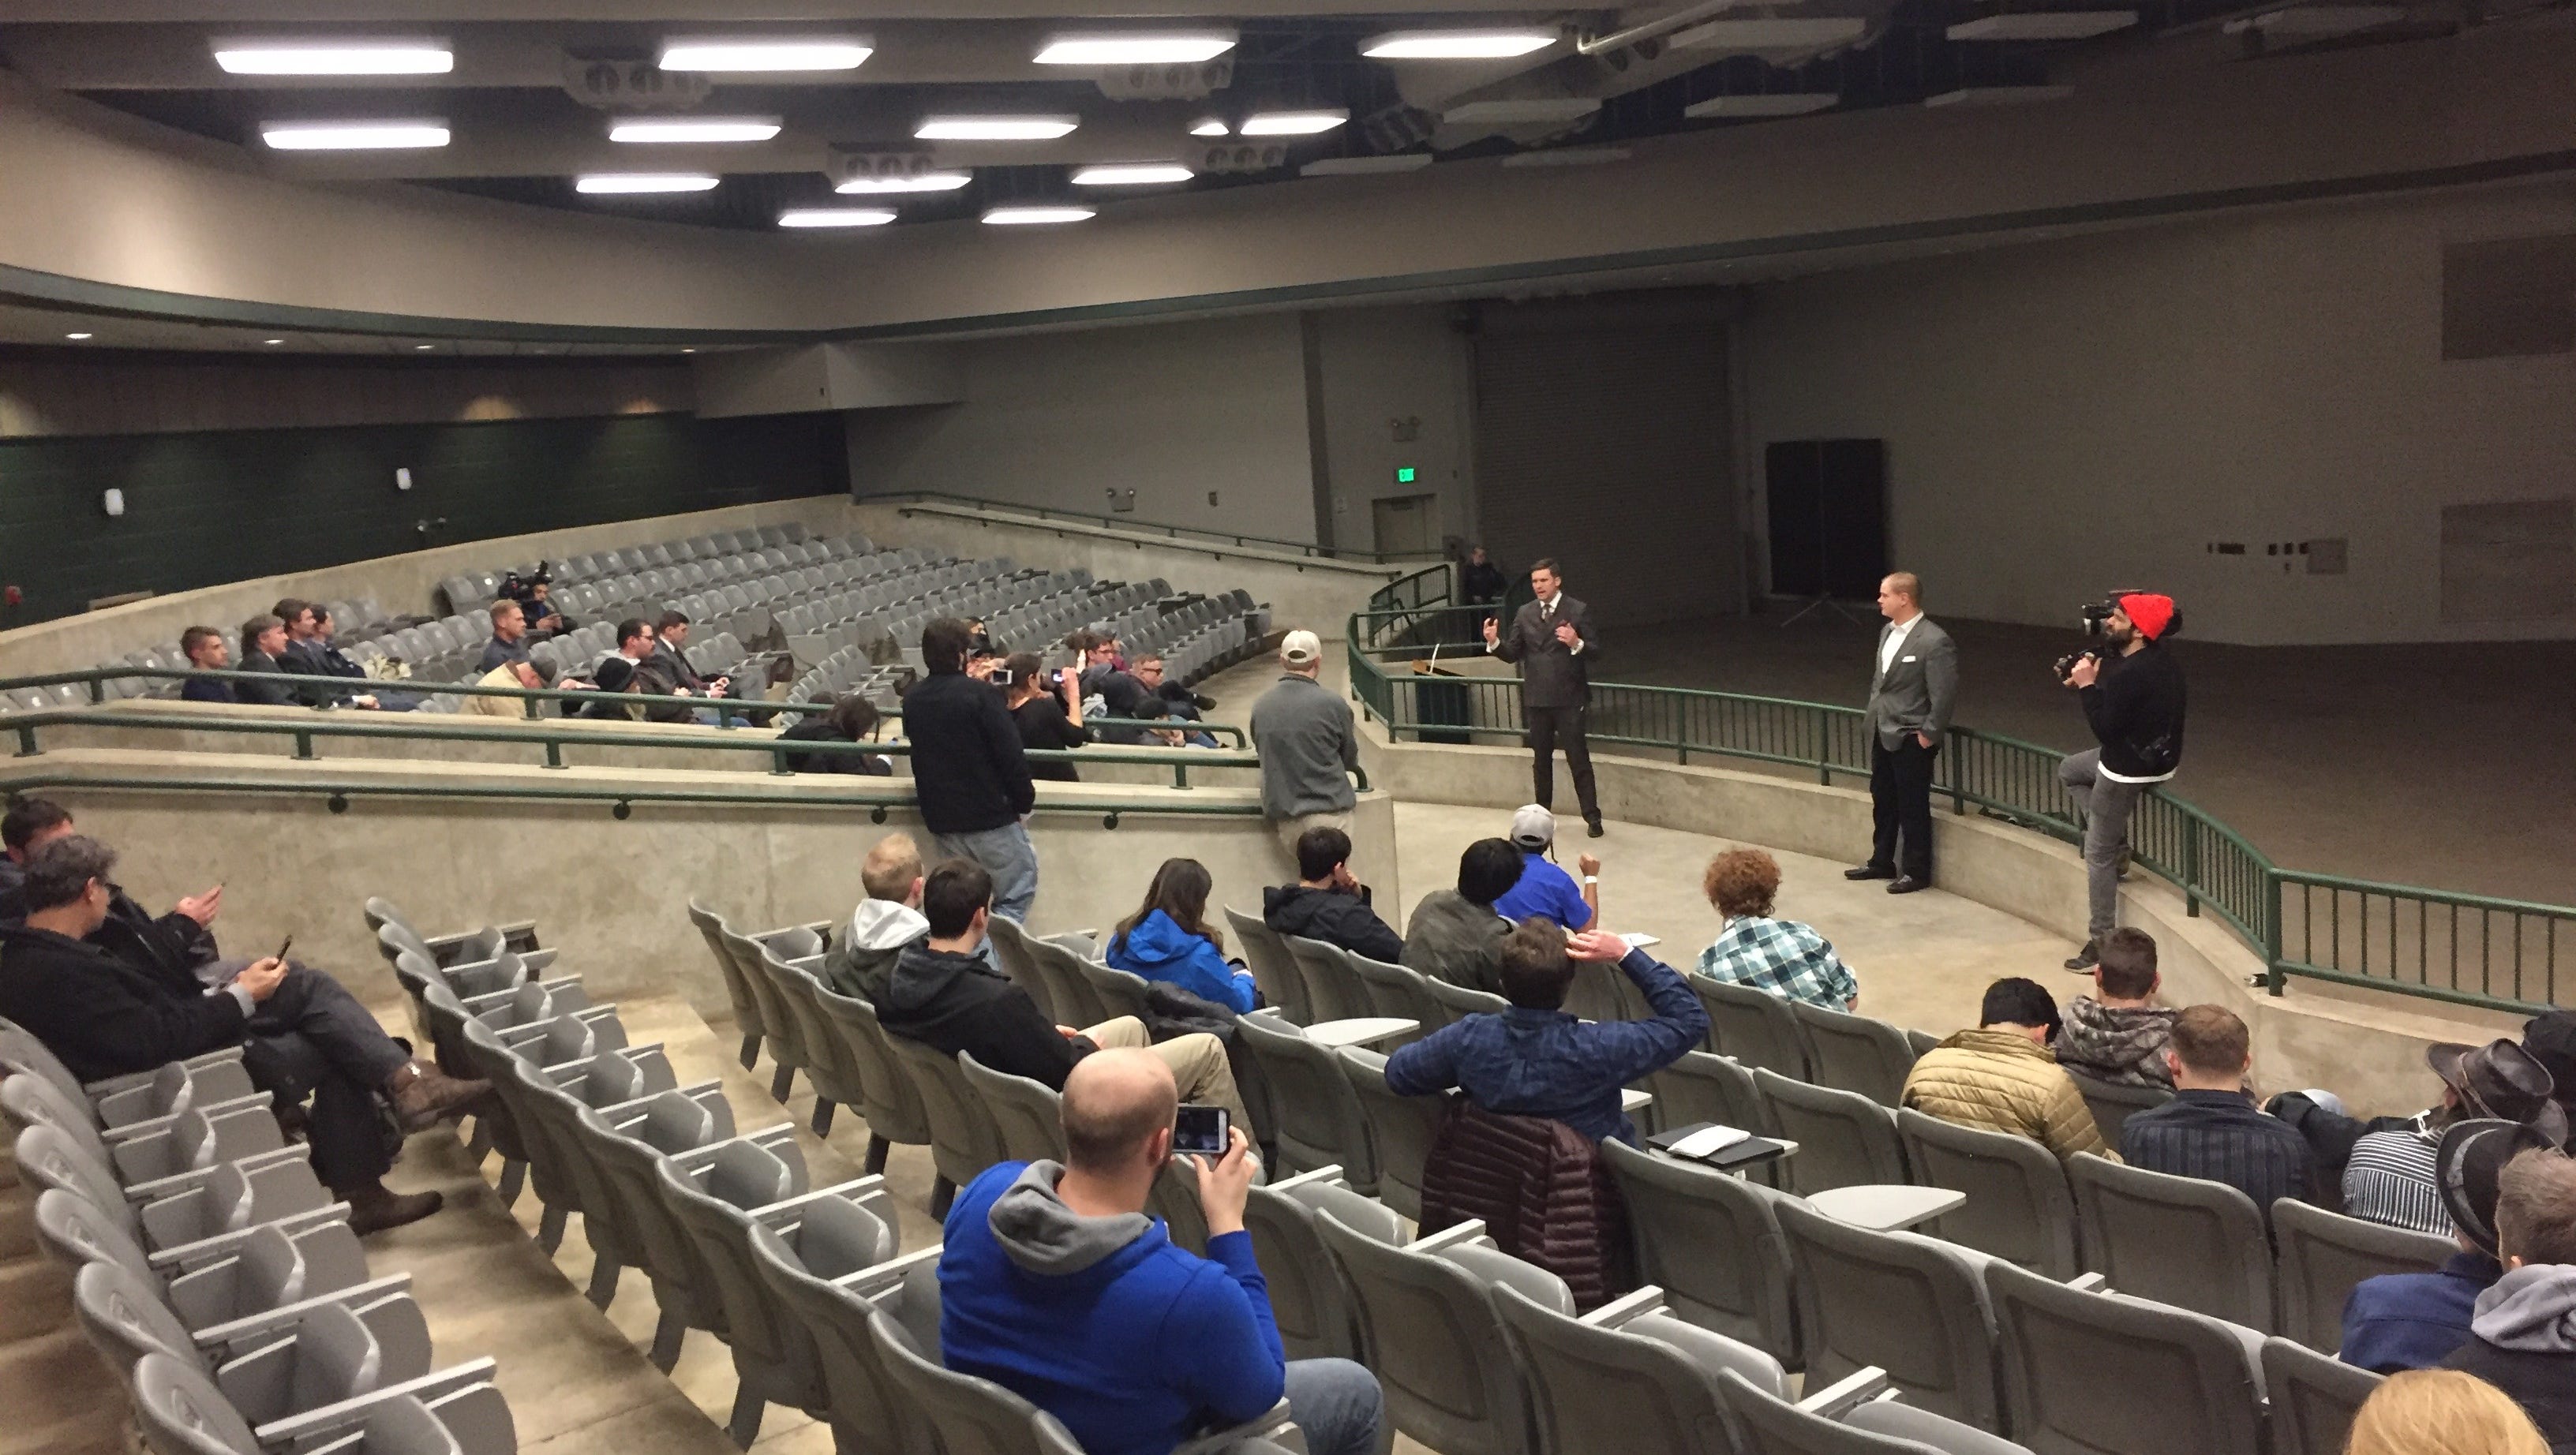 White nationalist Richard Spencer speaks inside the mostly empty Pavilion for Agriculture and Livestock Education at Michigan State University on Monday, March 5, 2018.